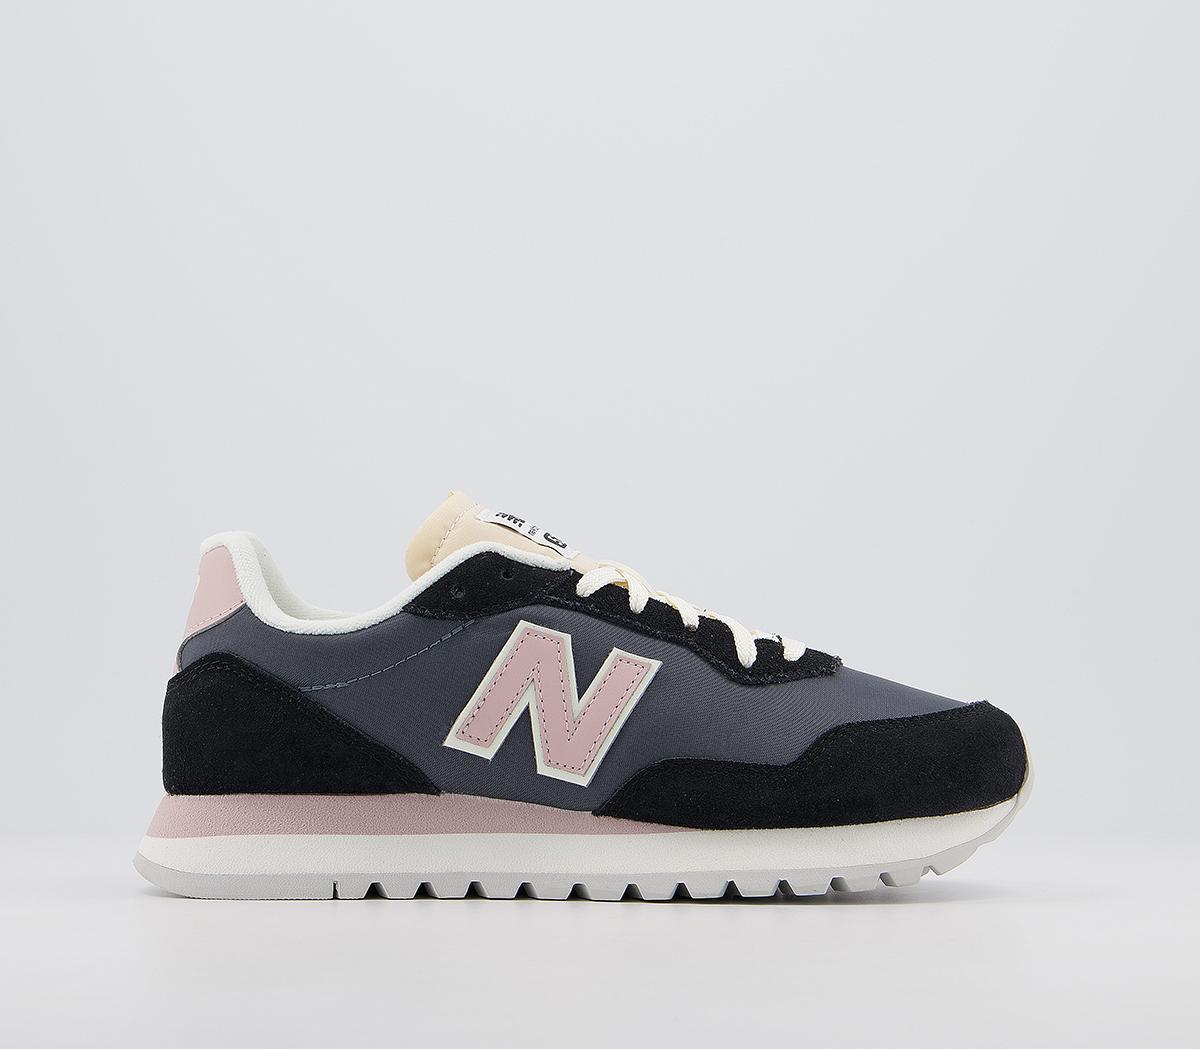 New Balance 527 Trainers Black Saturn Pink - Women's Trainers